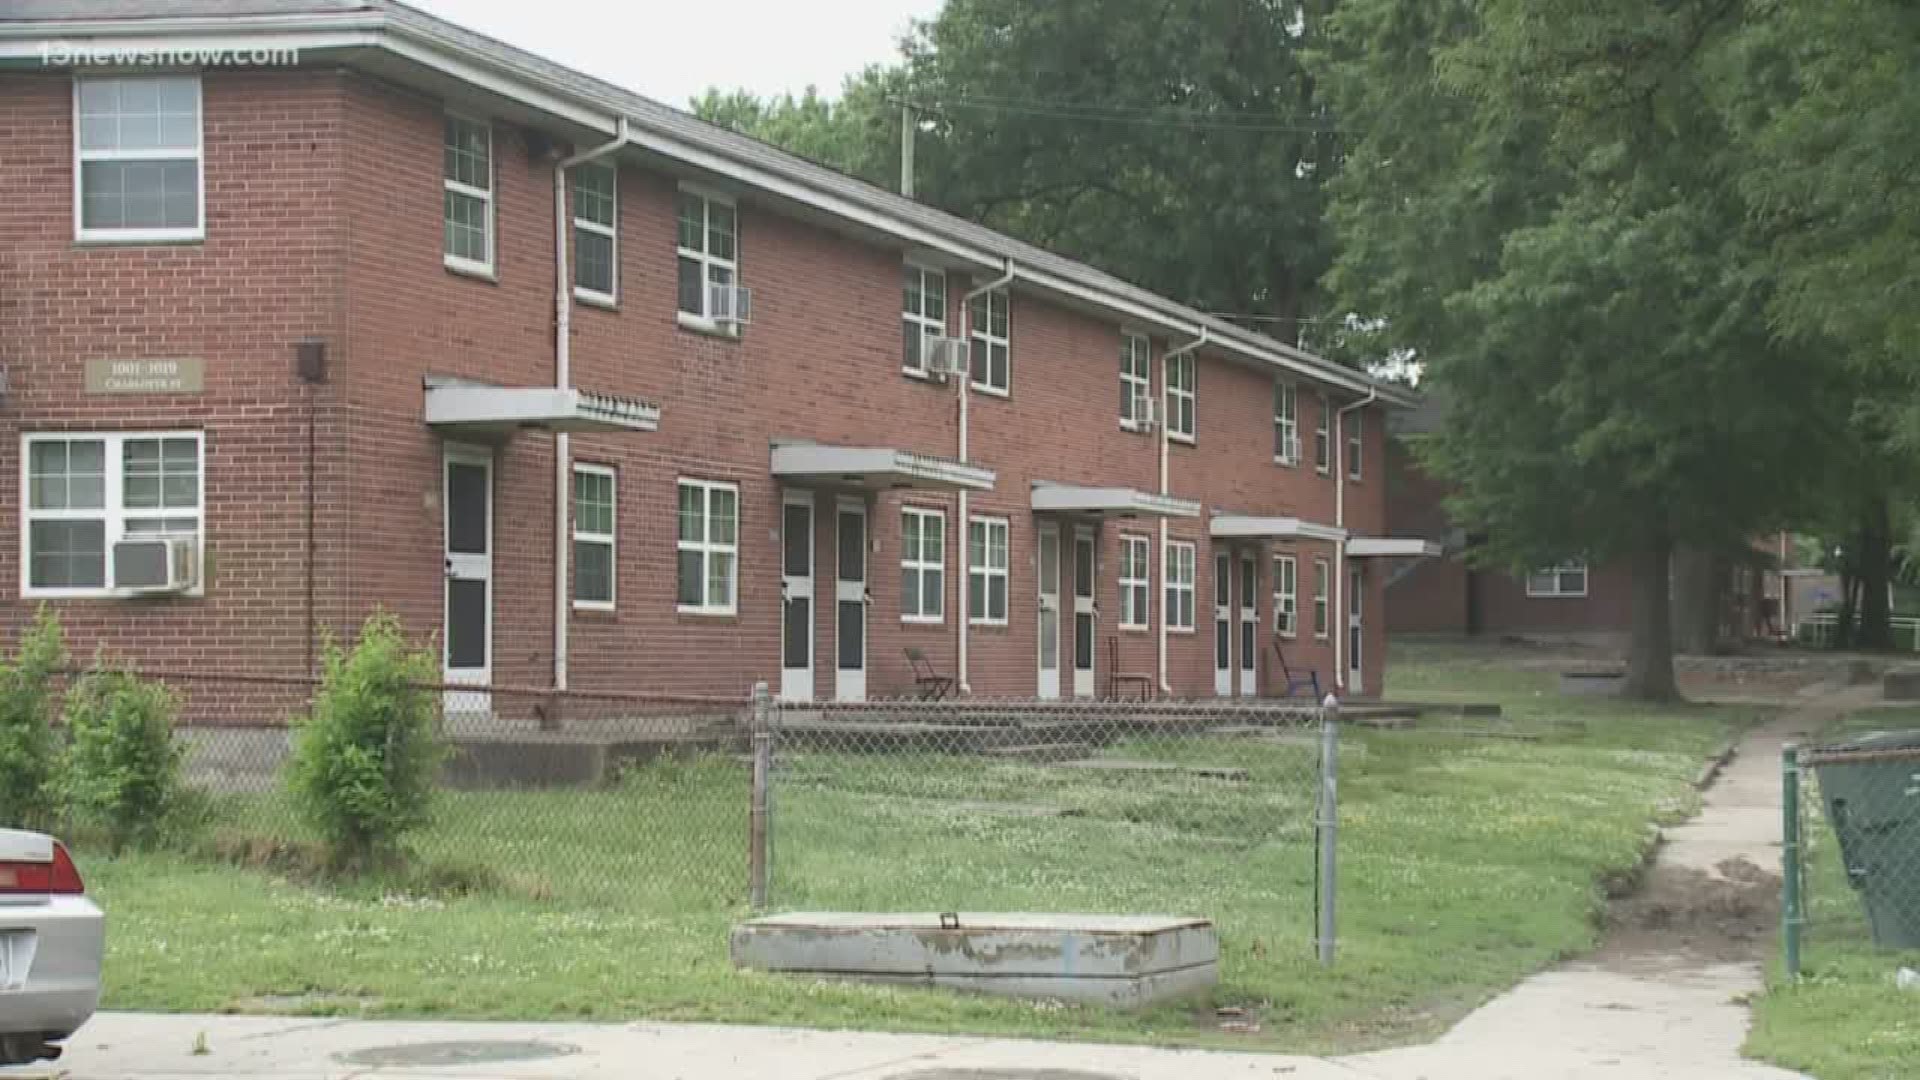 After the announcement that Norfolk was picked to receive $30 million for redevelopment, people in the Tidewater Gardens neighborhood were concerned they wouldn't be able to afford the new housing.